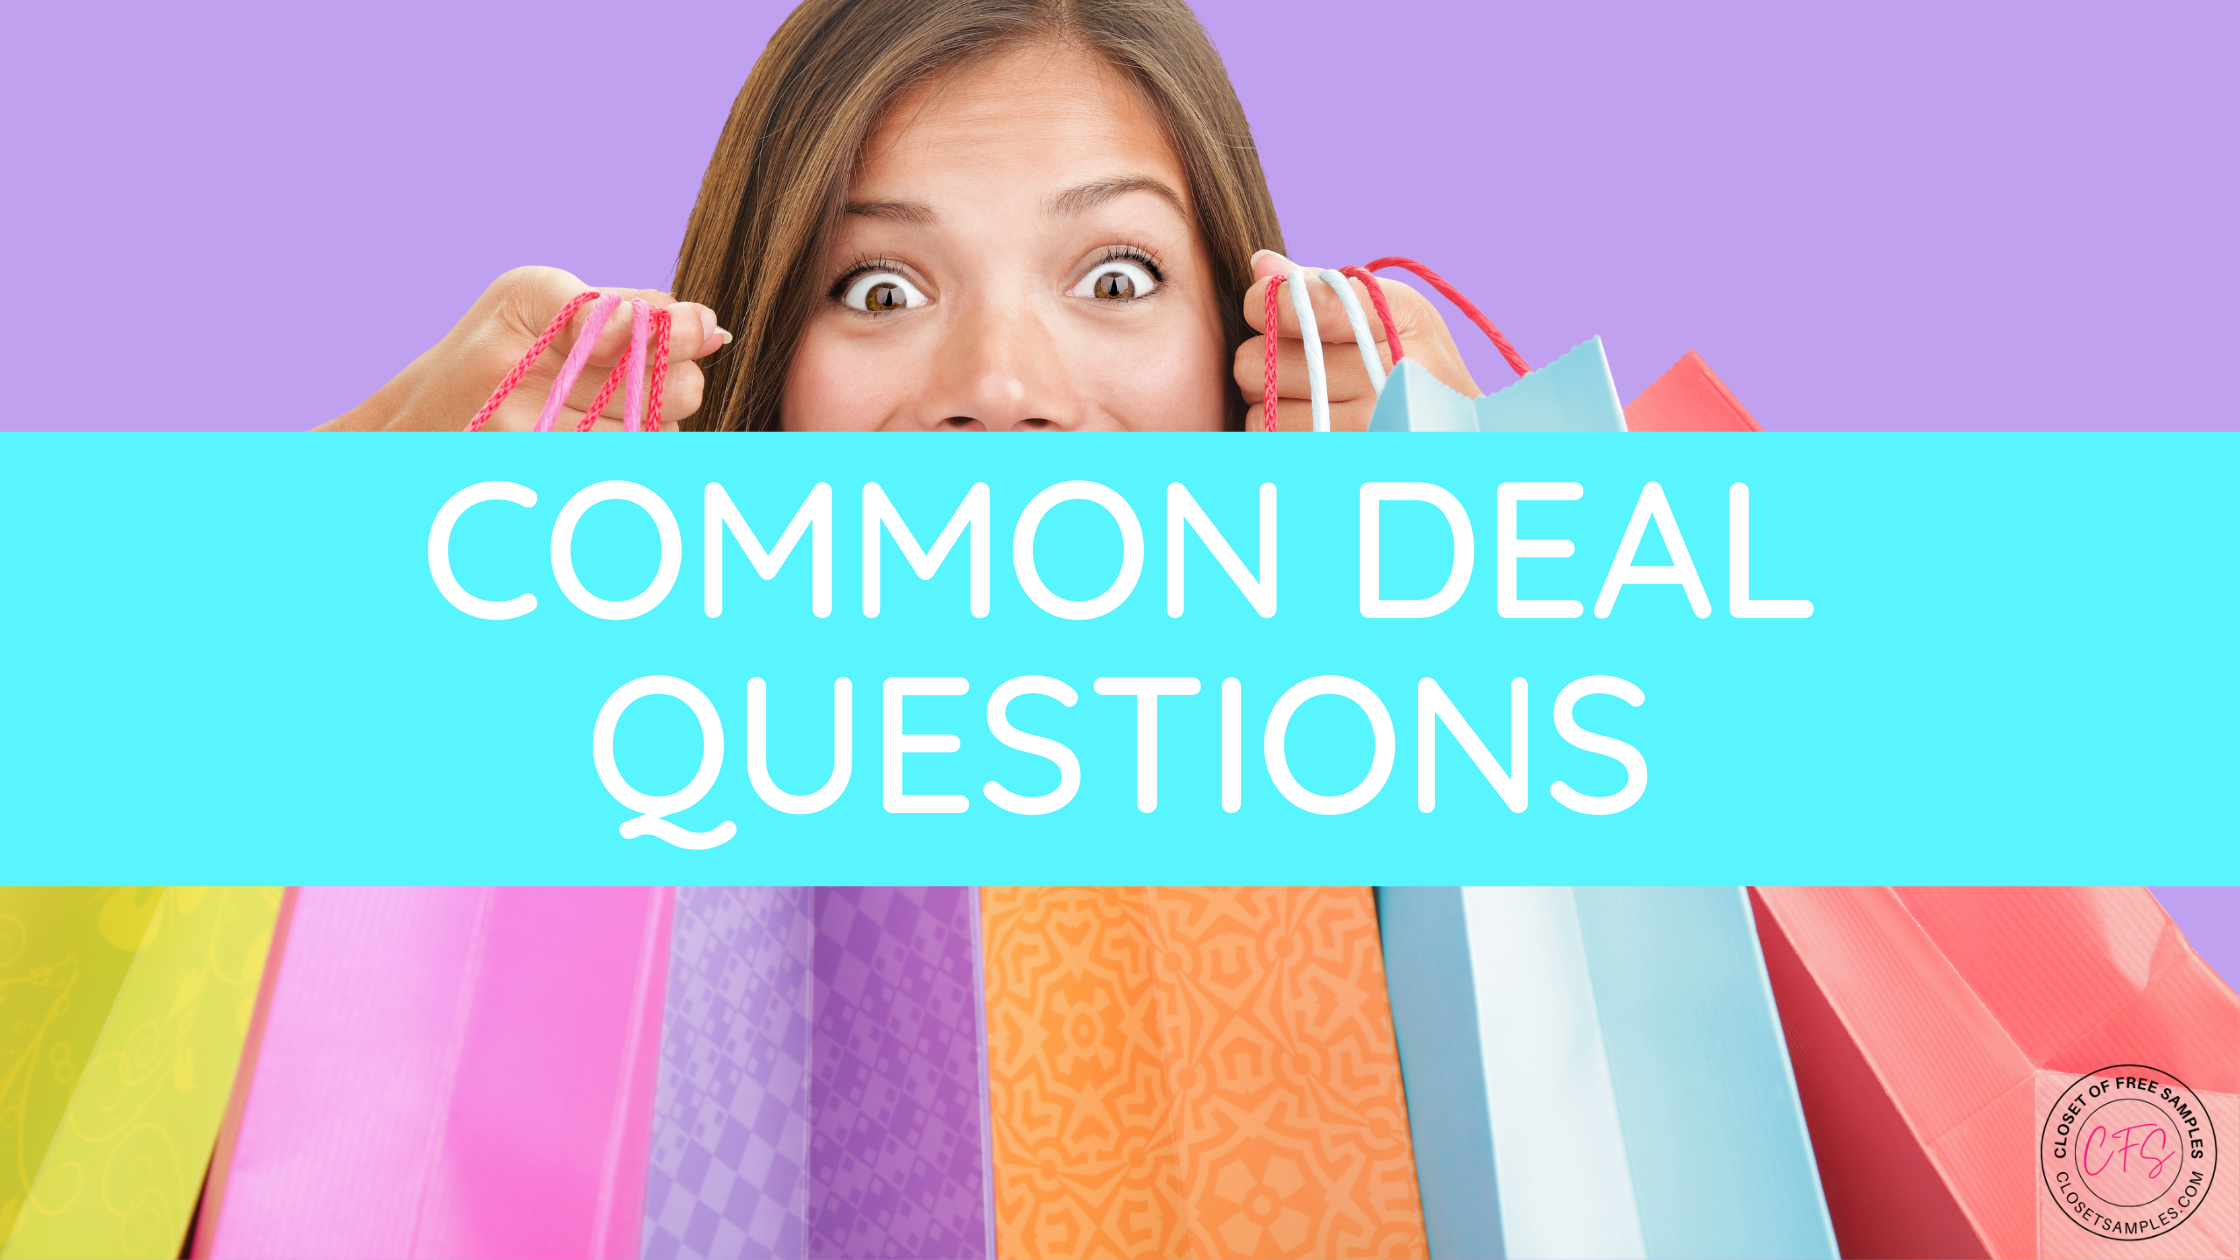 The-Ultimate-Deals-Finding-FAQ-Closetsamples-Deal-Finder-common-questions.png